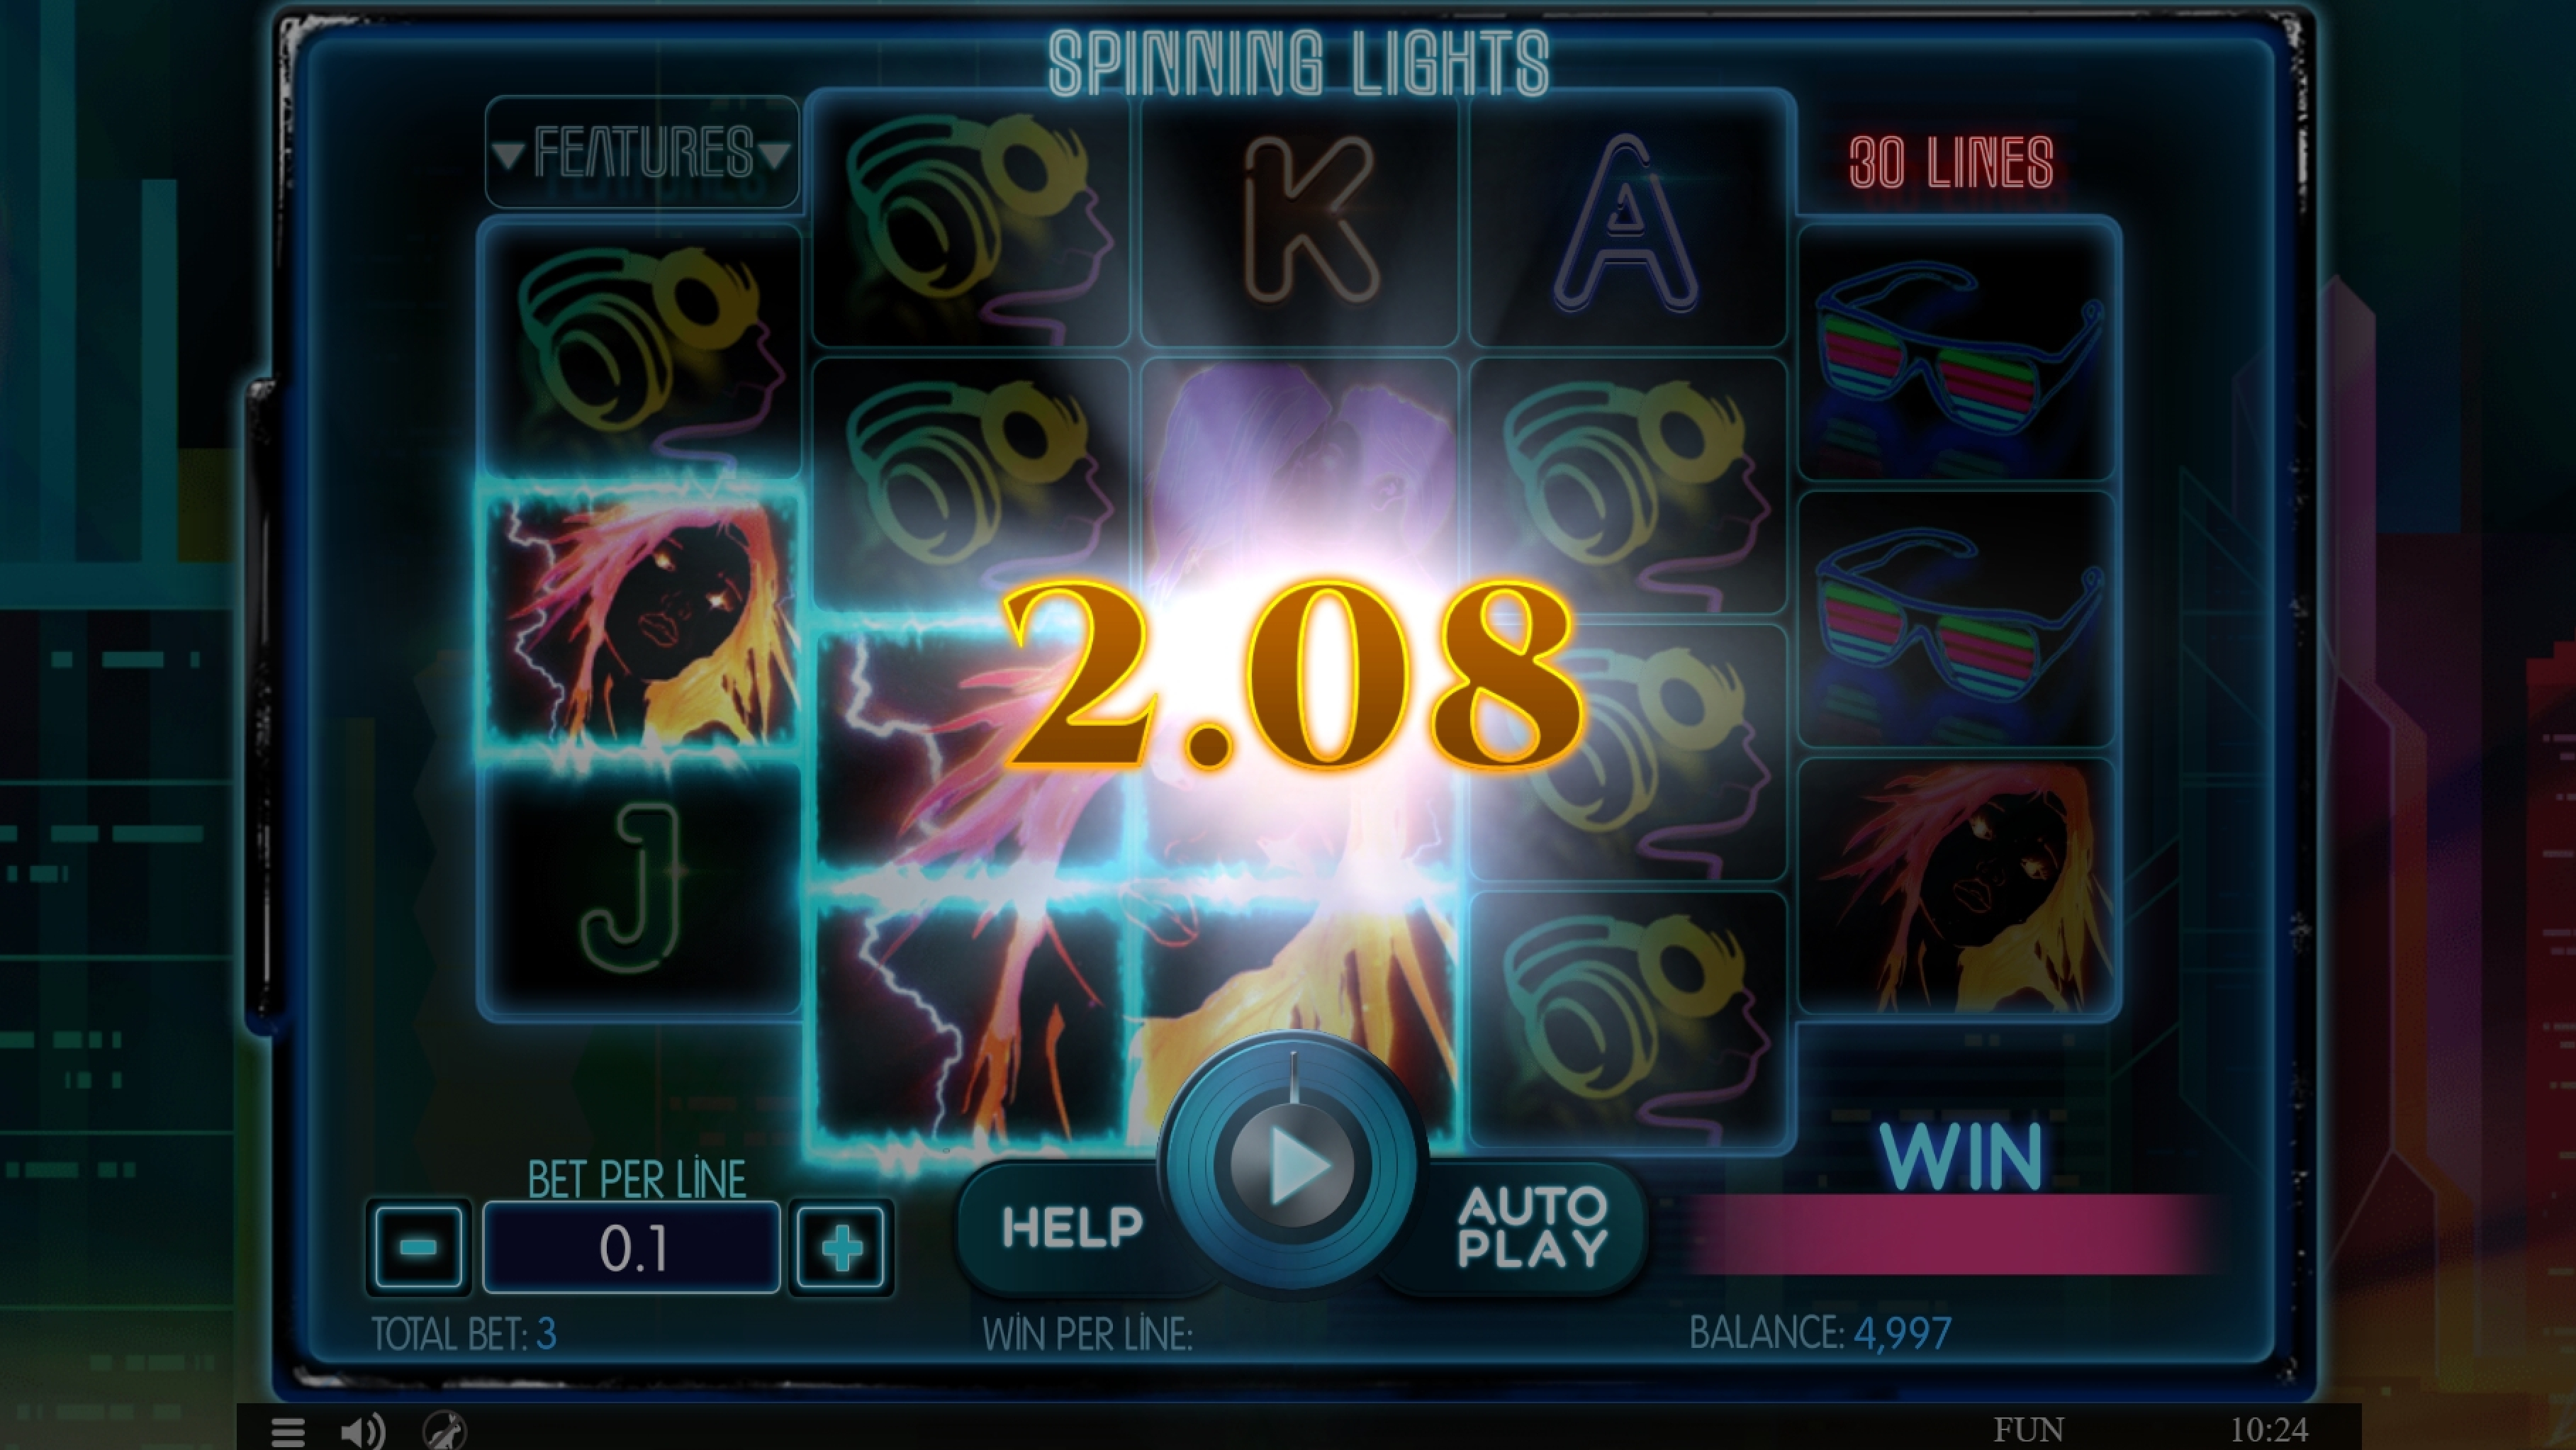 Win Money in Spinning Lights Free Slot Game by Spinomenal